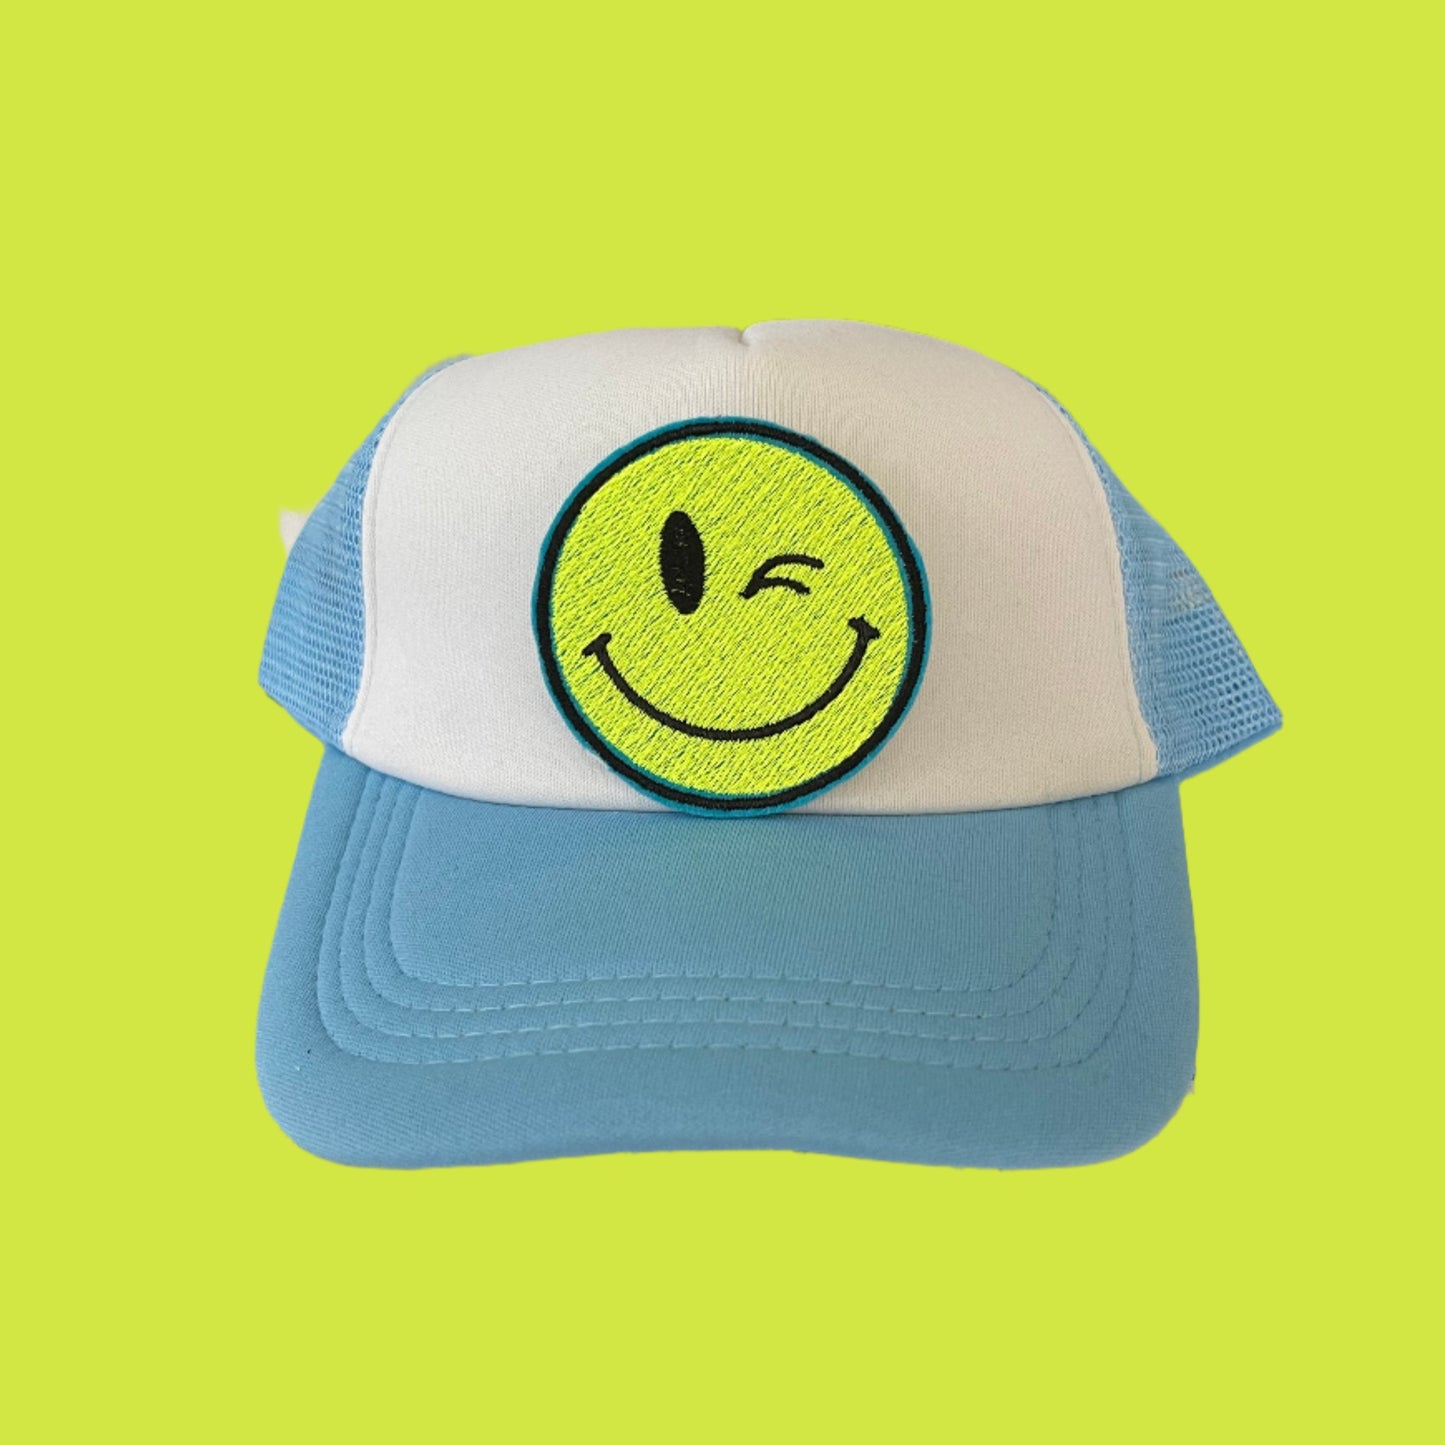 Iron-on patch featuring a bright yellow winking smiley face, showcasing a playful and retro aesthetic.